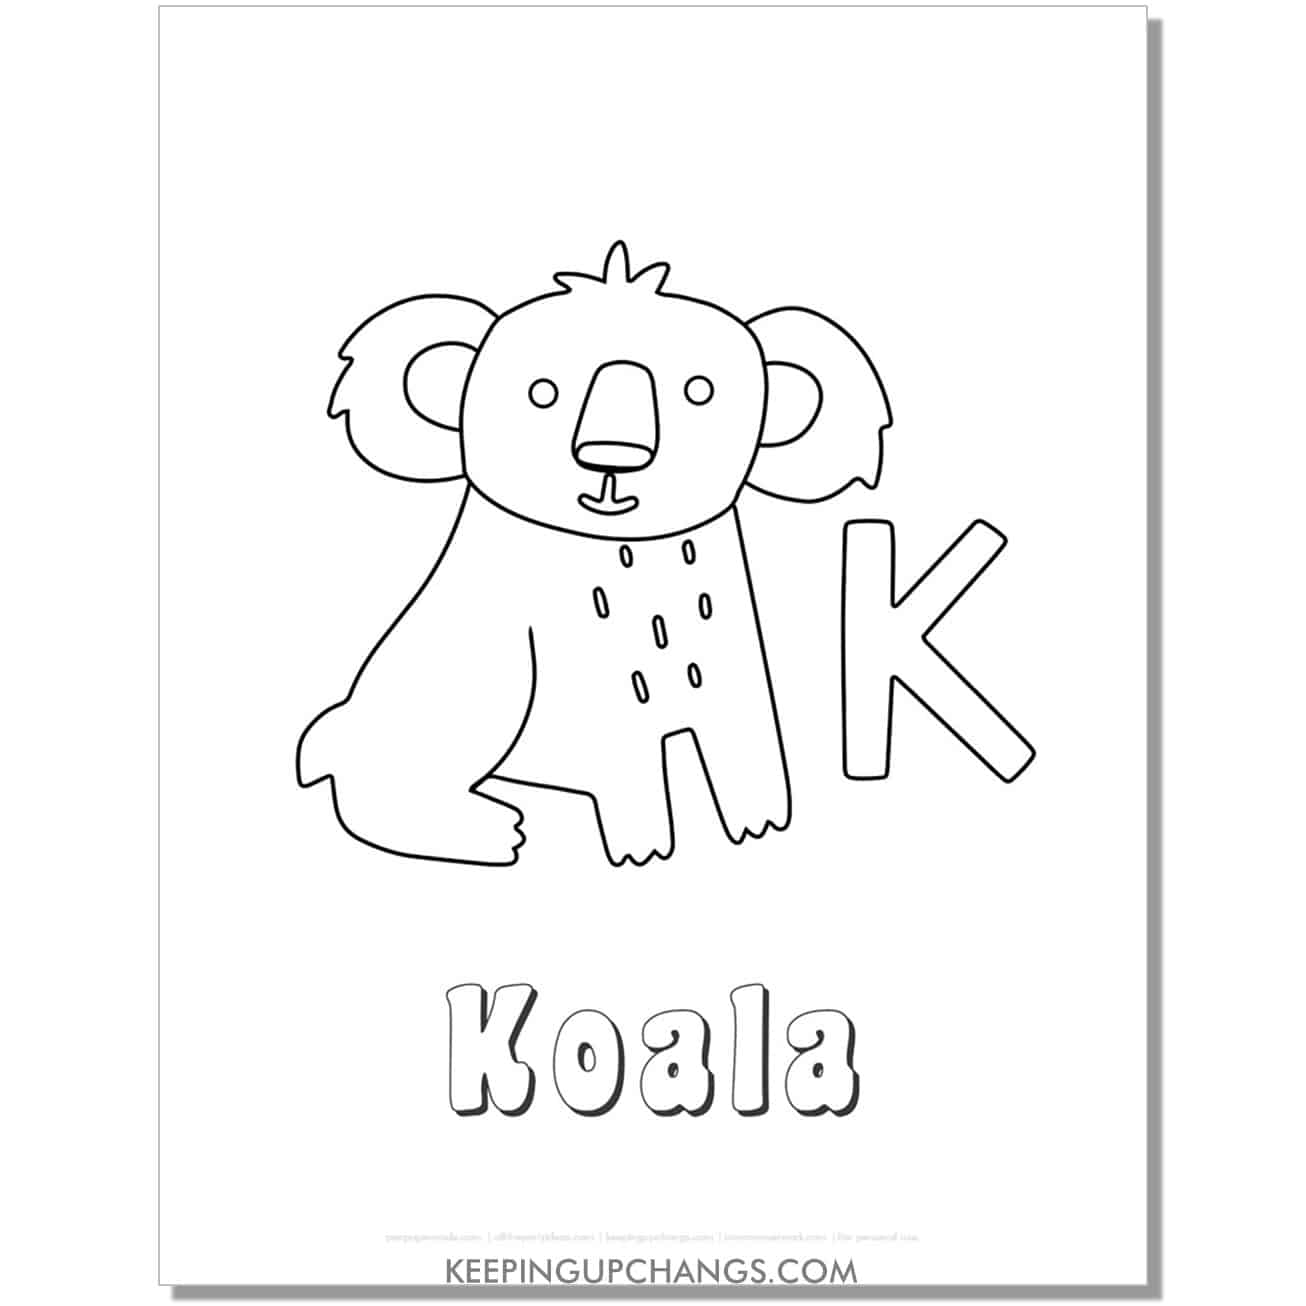 fun abc k coloring page with koala hand drawing.